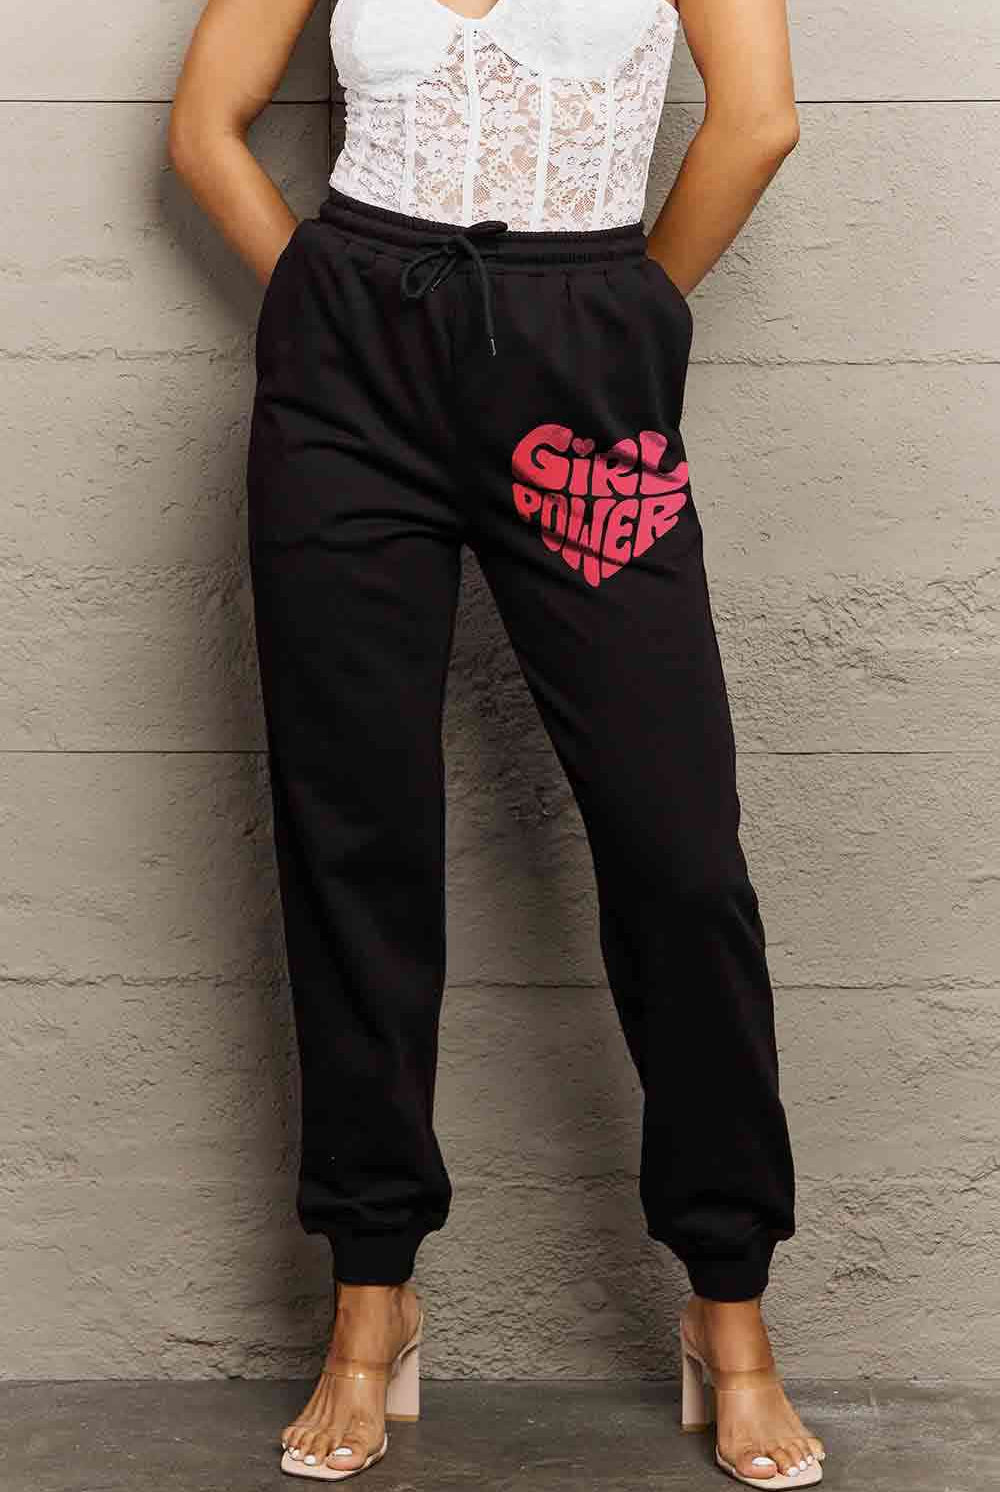 Simply Love Full Size GIRL POWER Graphic Sweatpants - GemThreads Boutique